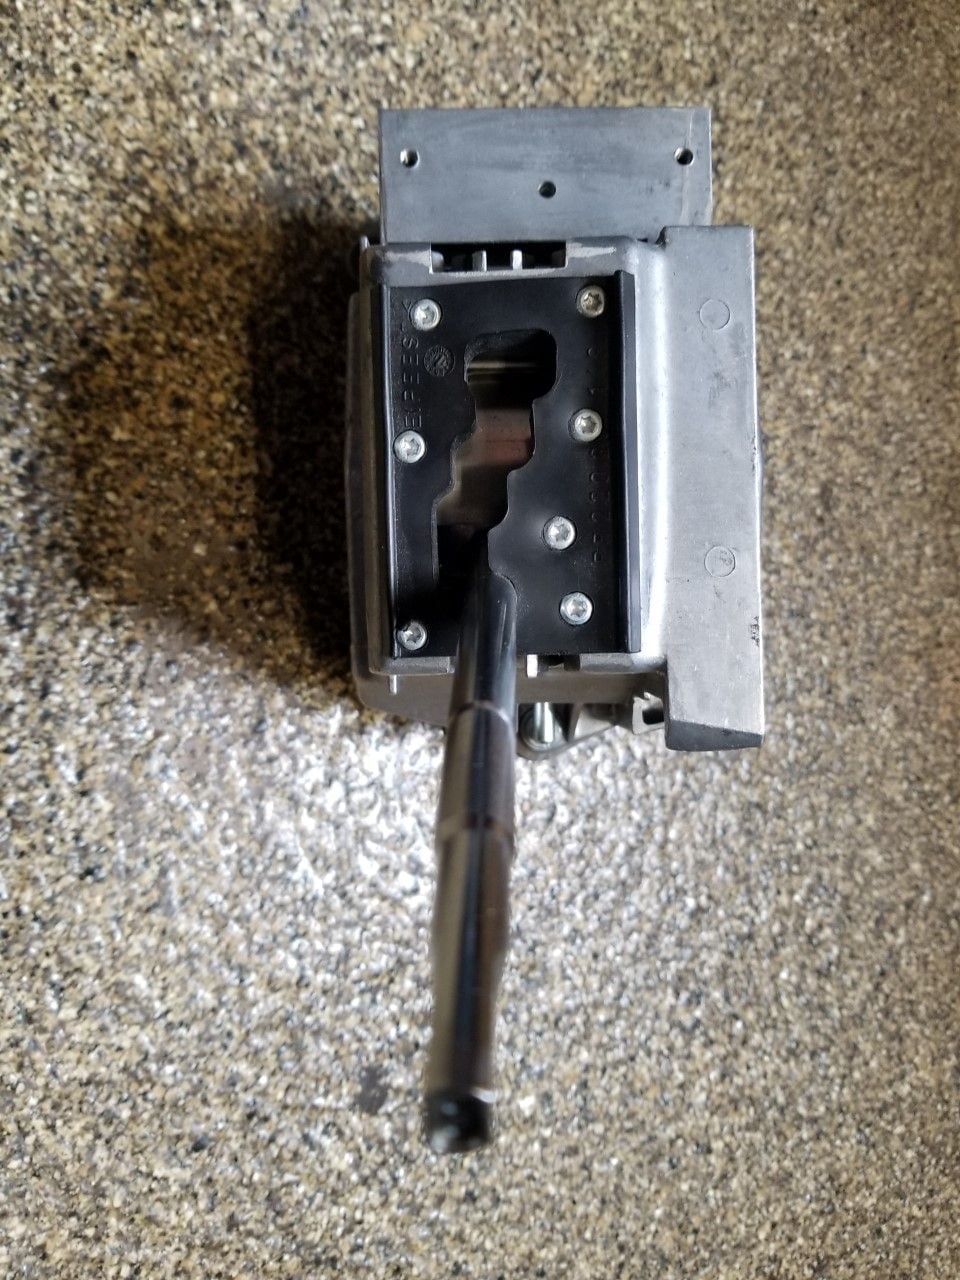 Miscellaneous - CL55/ S55 shifter assembly 03-06 W215 / W220 body styles - Used - Sugar Land, TX 77479, United States